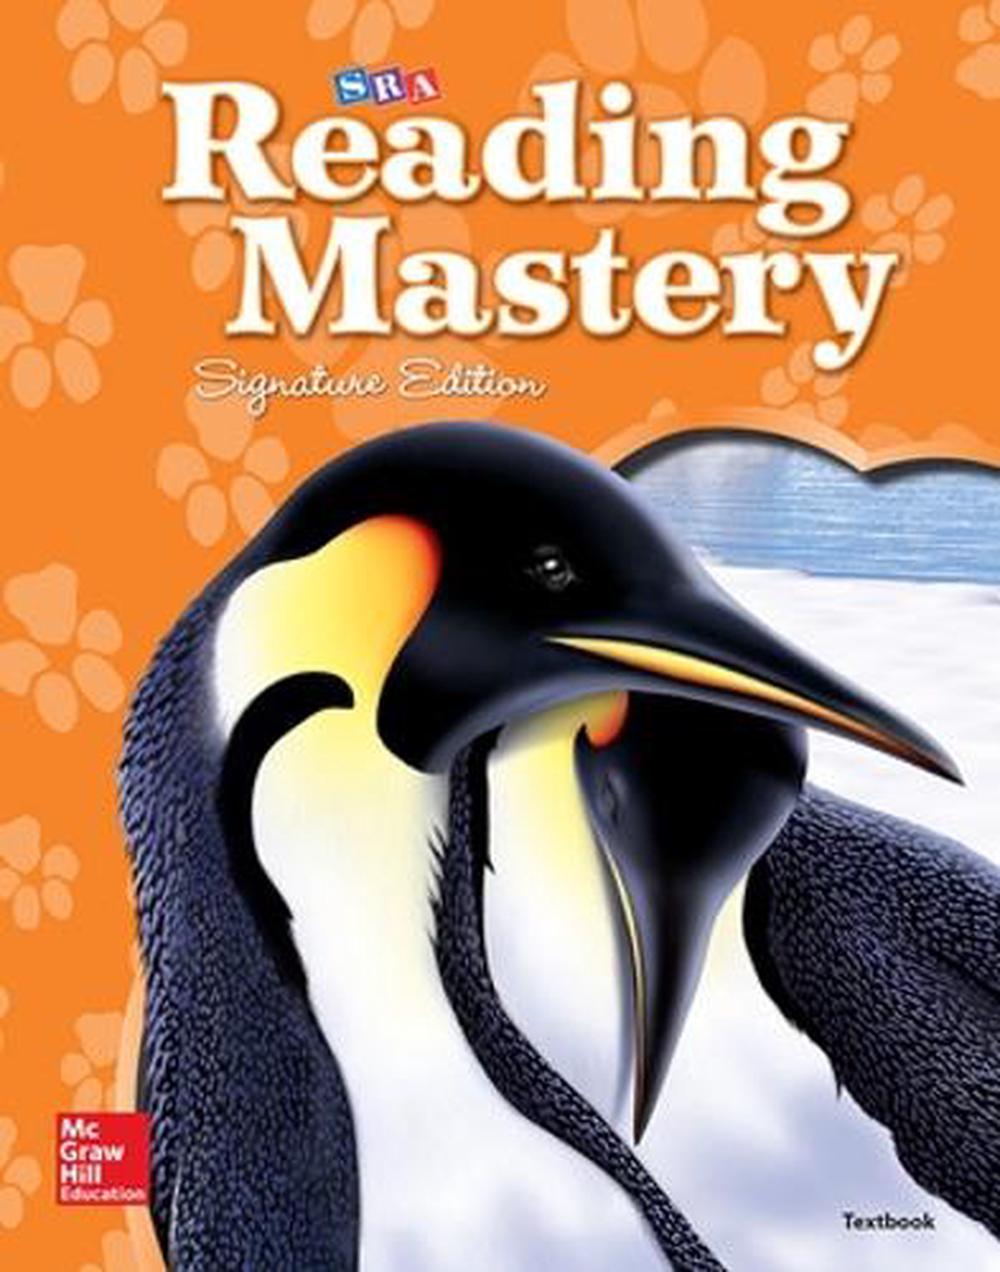 1-2,　Reading/Literature　The　by　McGraw　Textbook　Hardcover,　online　9780076124602　Buy　at　Nile　Reading　Strand　Grade　Mastery　Transition　Hill,